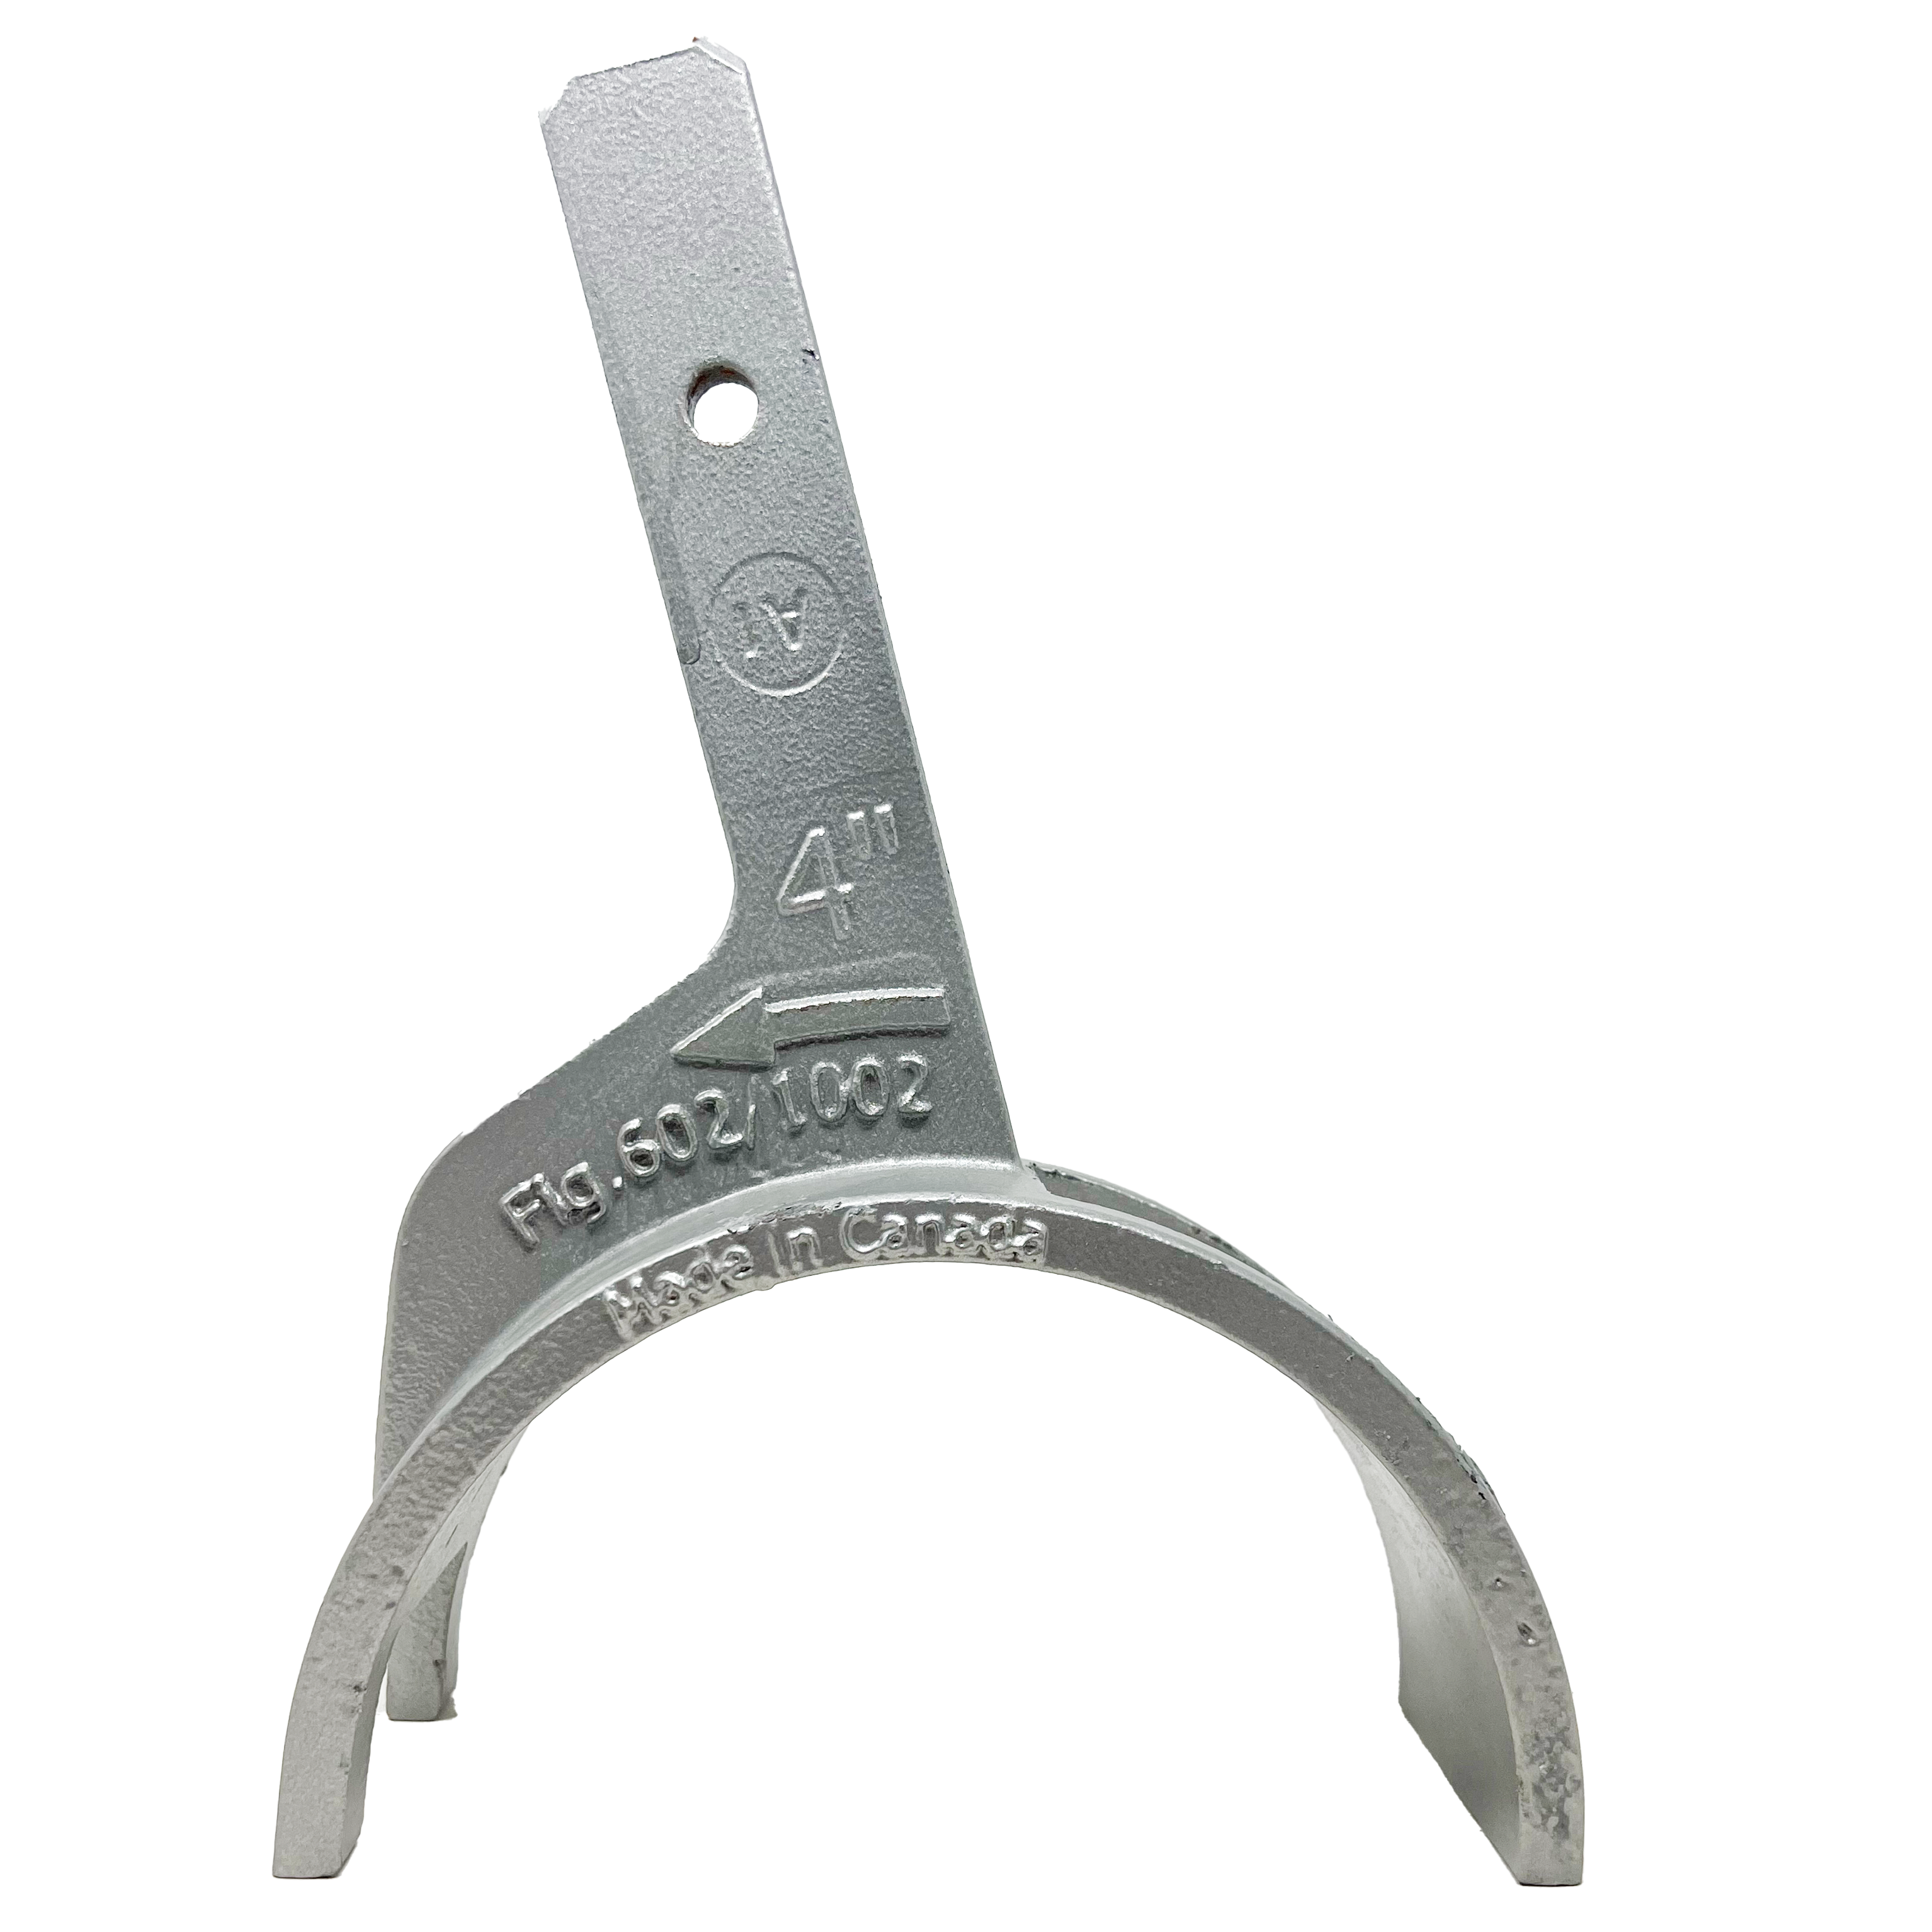 710-0025 HUWE Wrench Head, 4" for Figure 602, Figure 1002